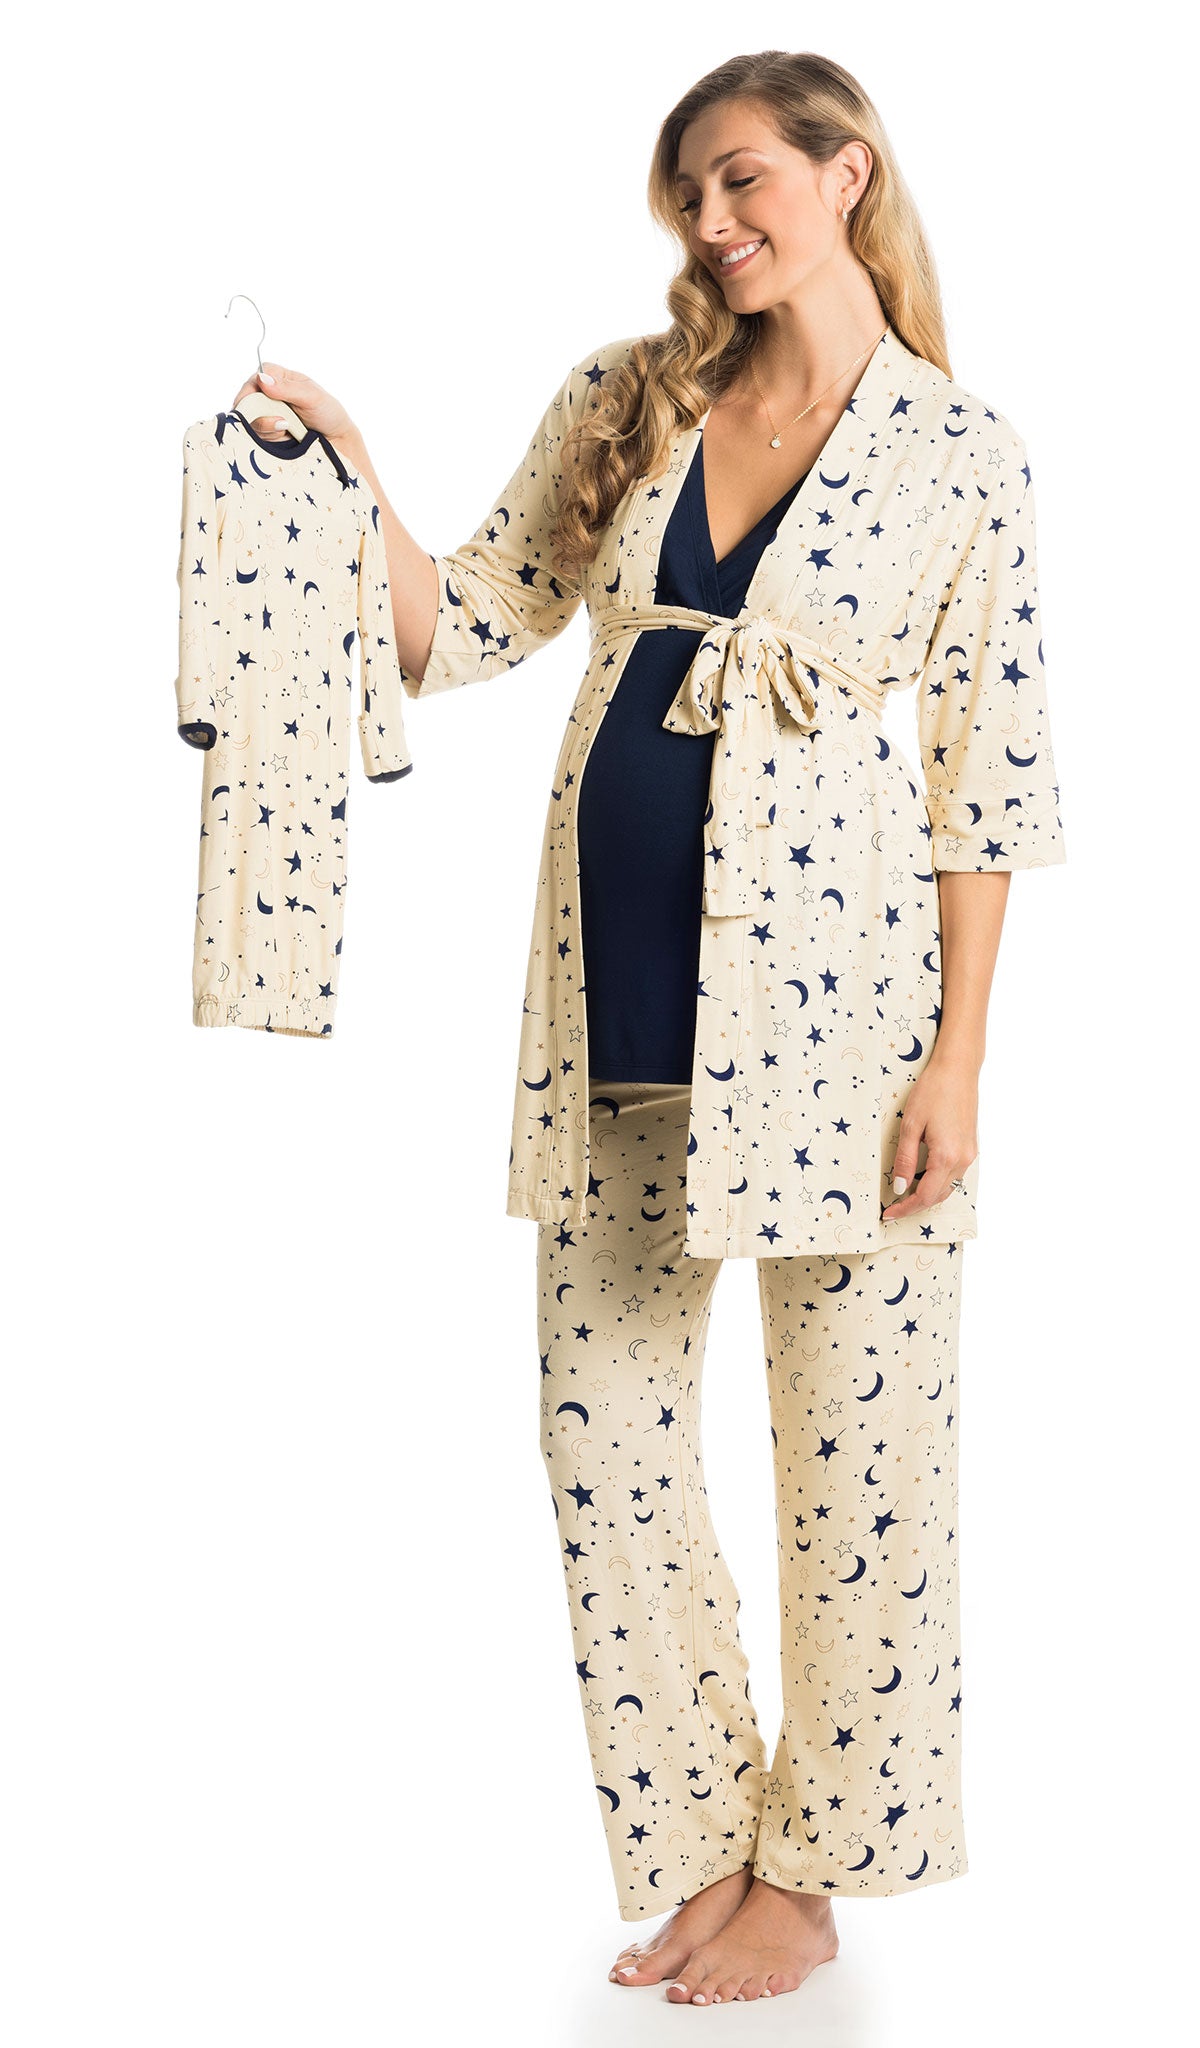 Twinkle Analise 5-Piece Set. Pregnant woman wearing 3/4 sleeve robe, tank top and pant while holding a baby gown.